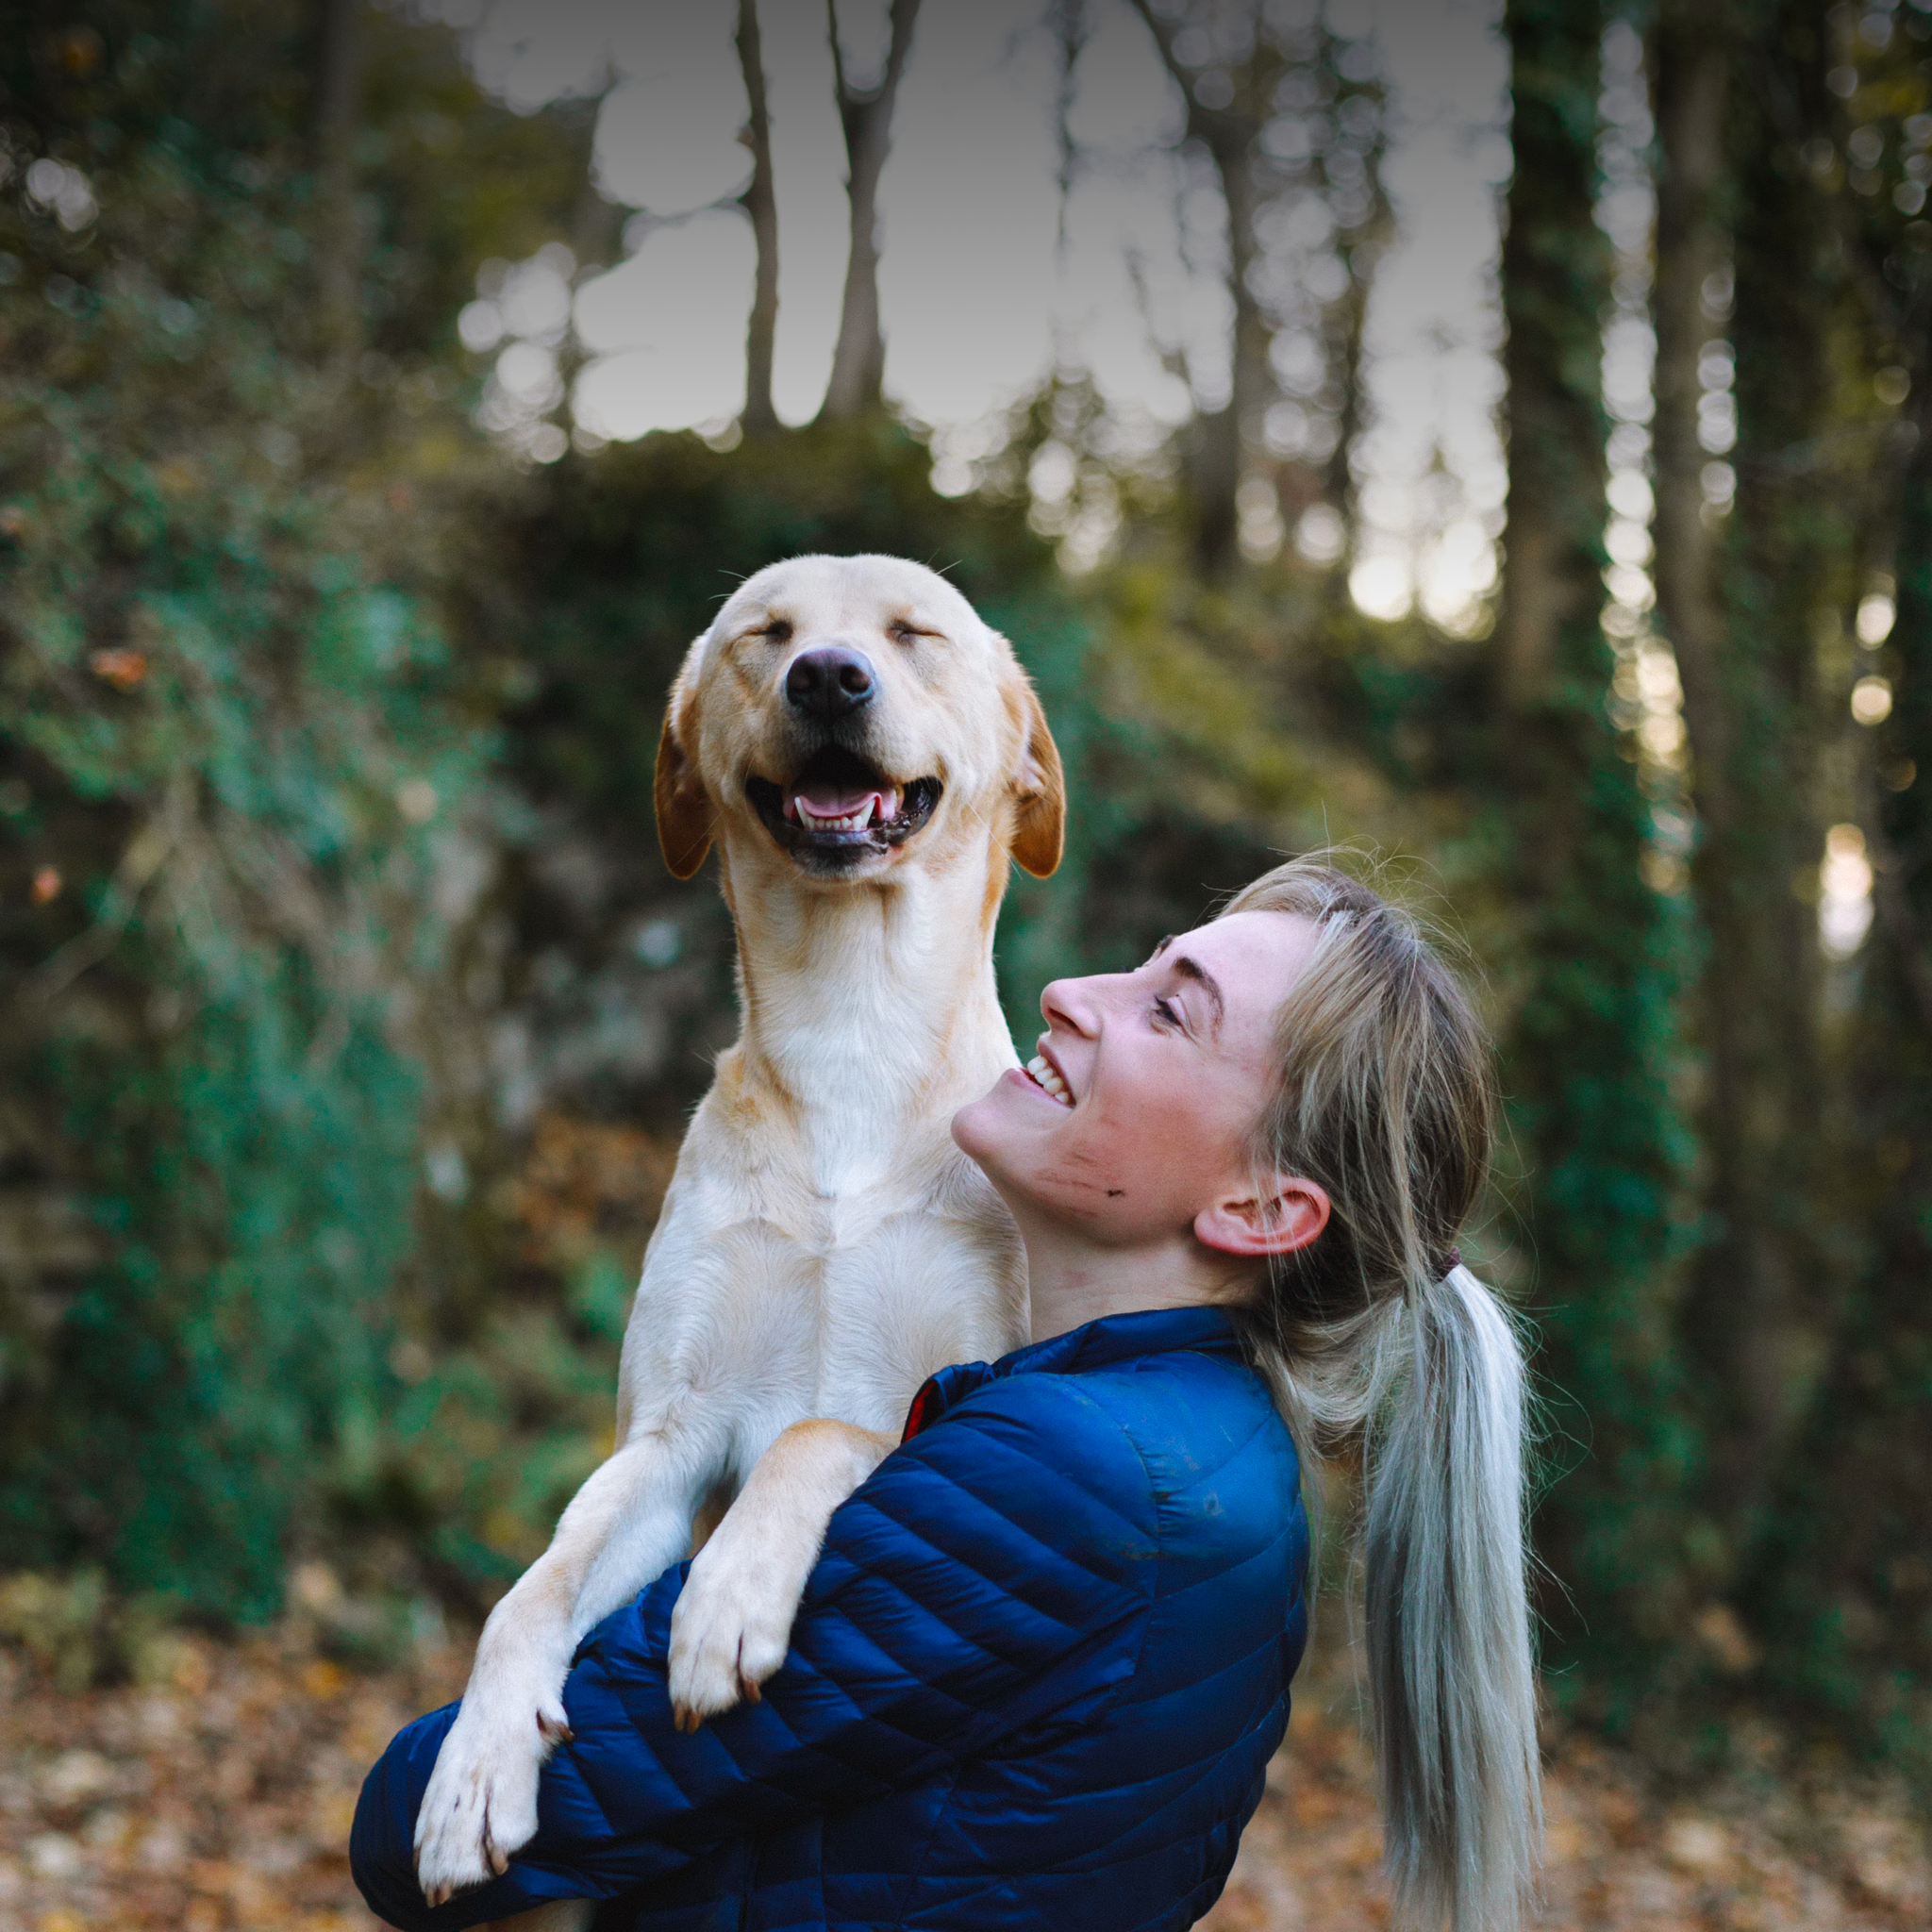 A young woman holds up a joyful dog in the woods